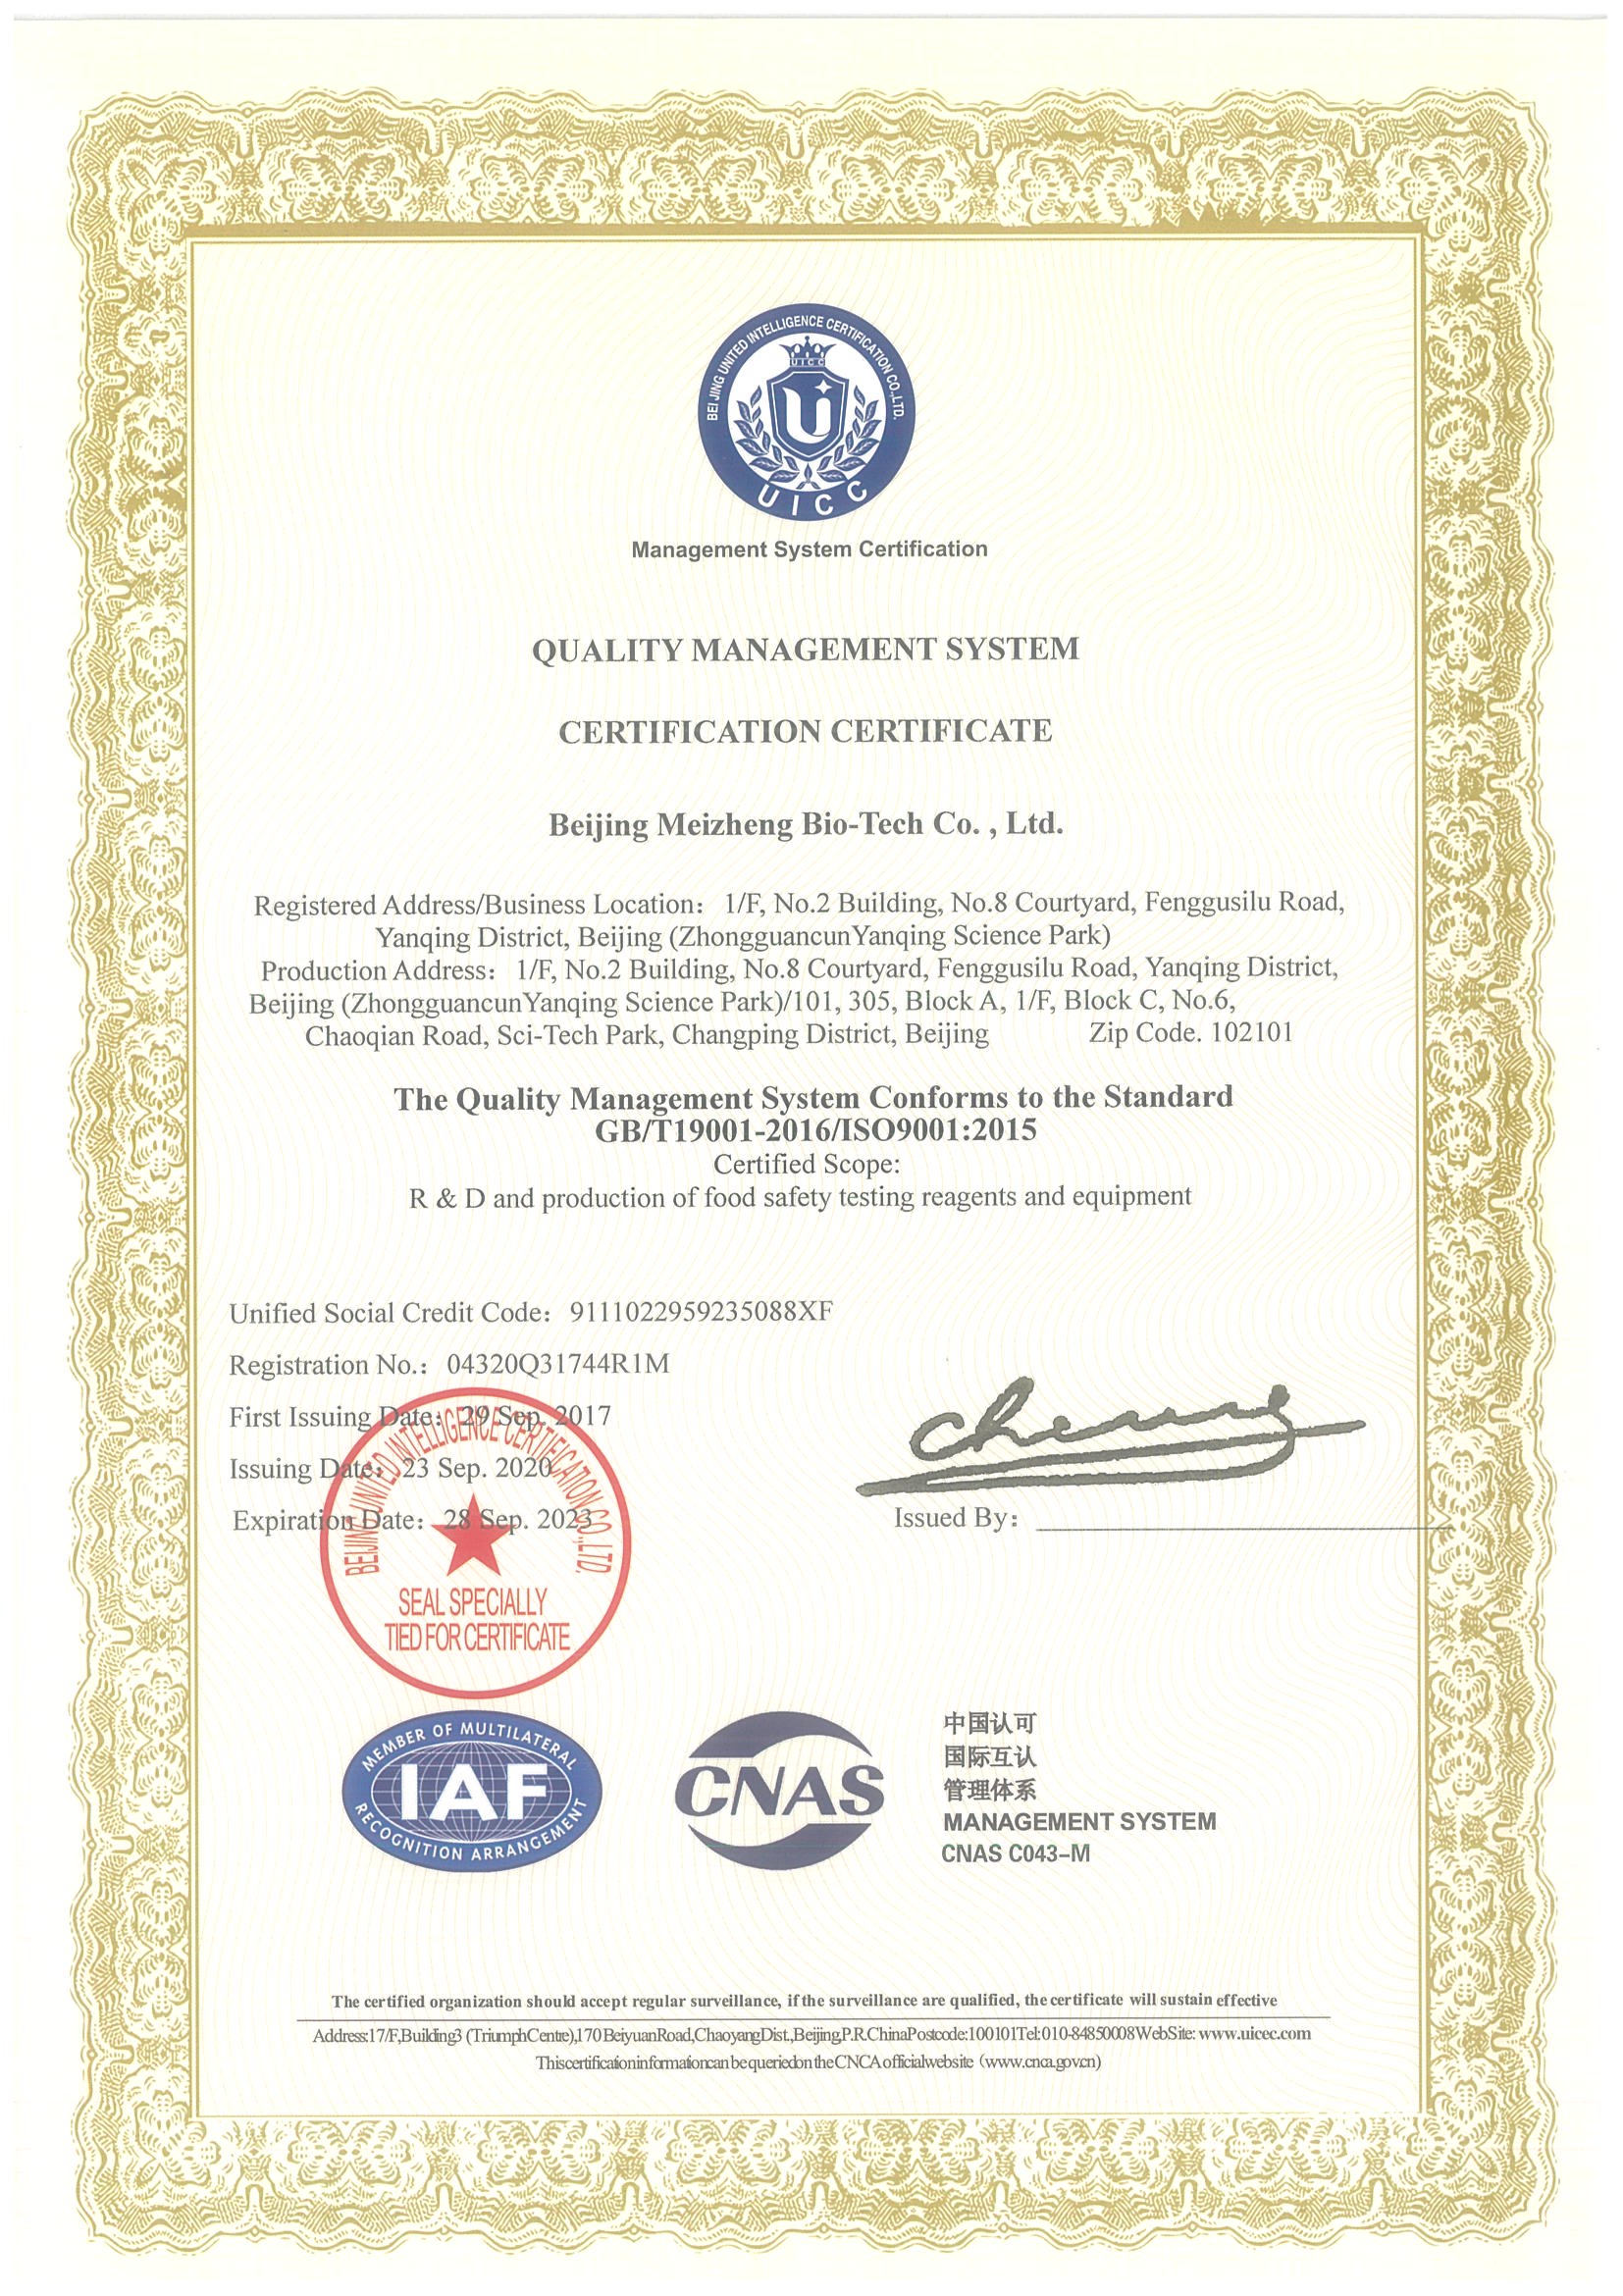 Quality Management System Certification Certificate of Beijing Meizheng